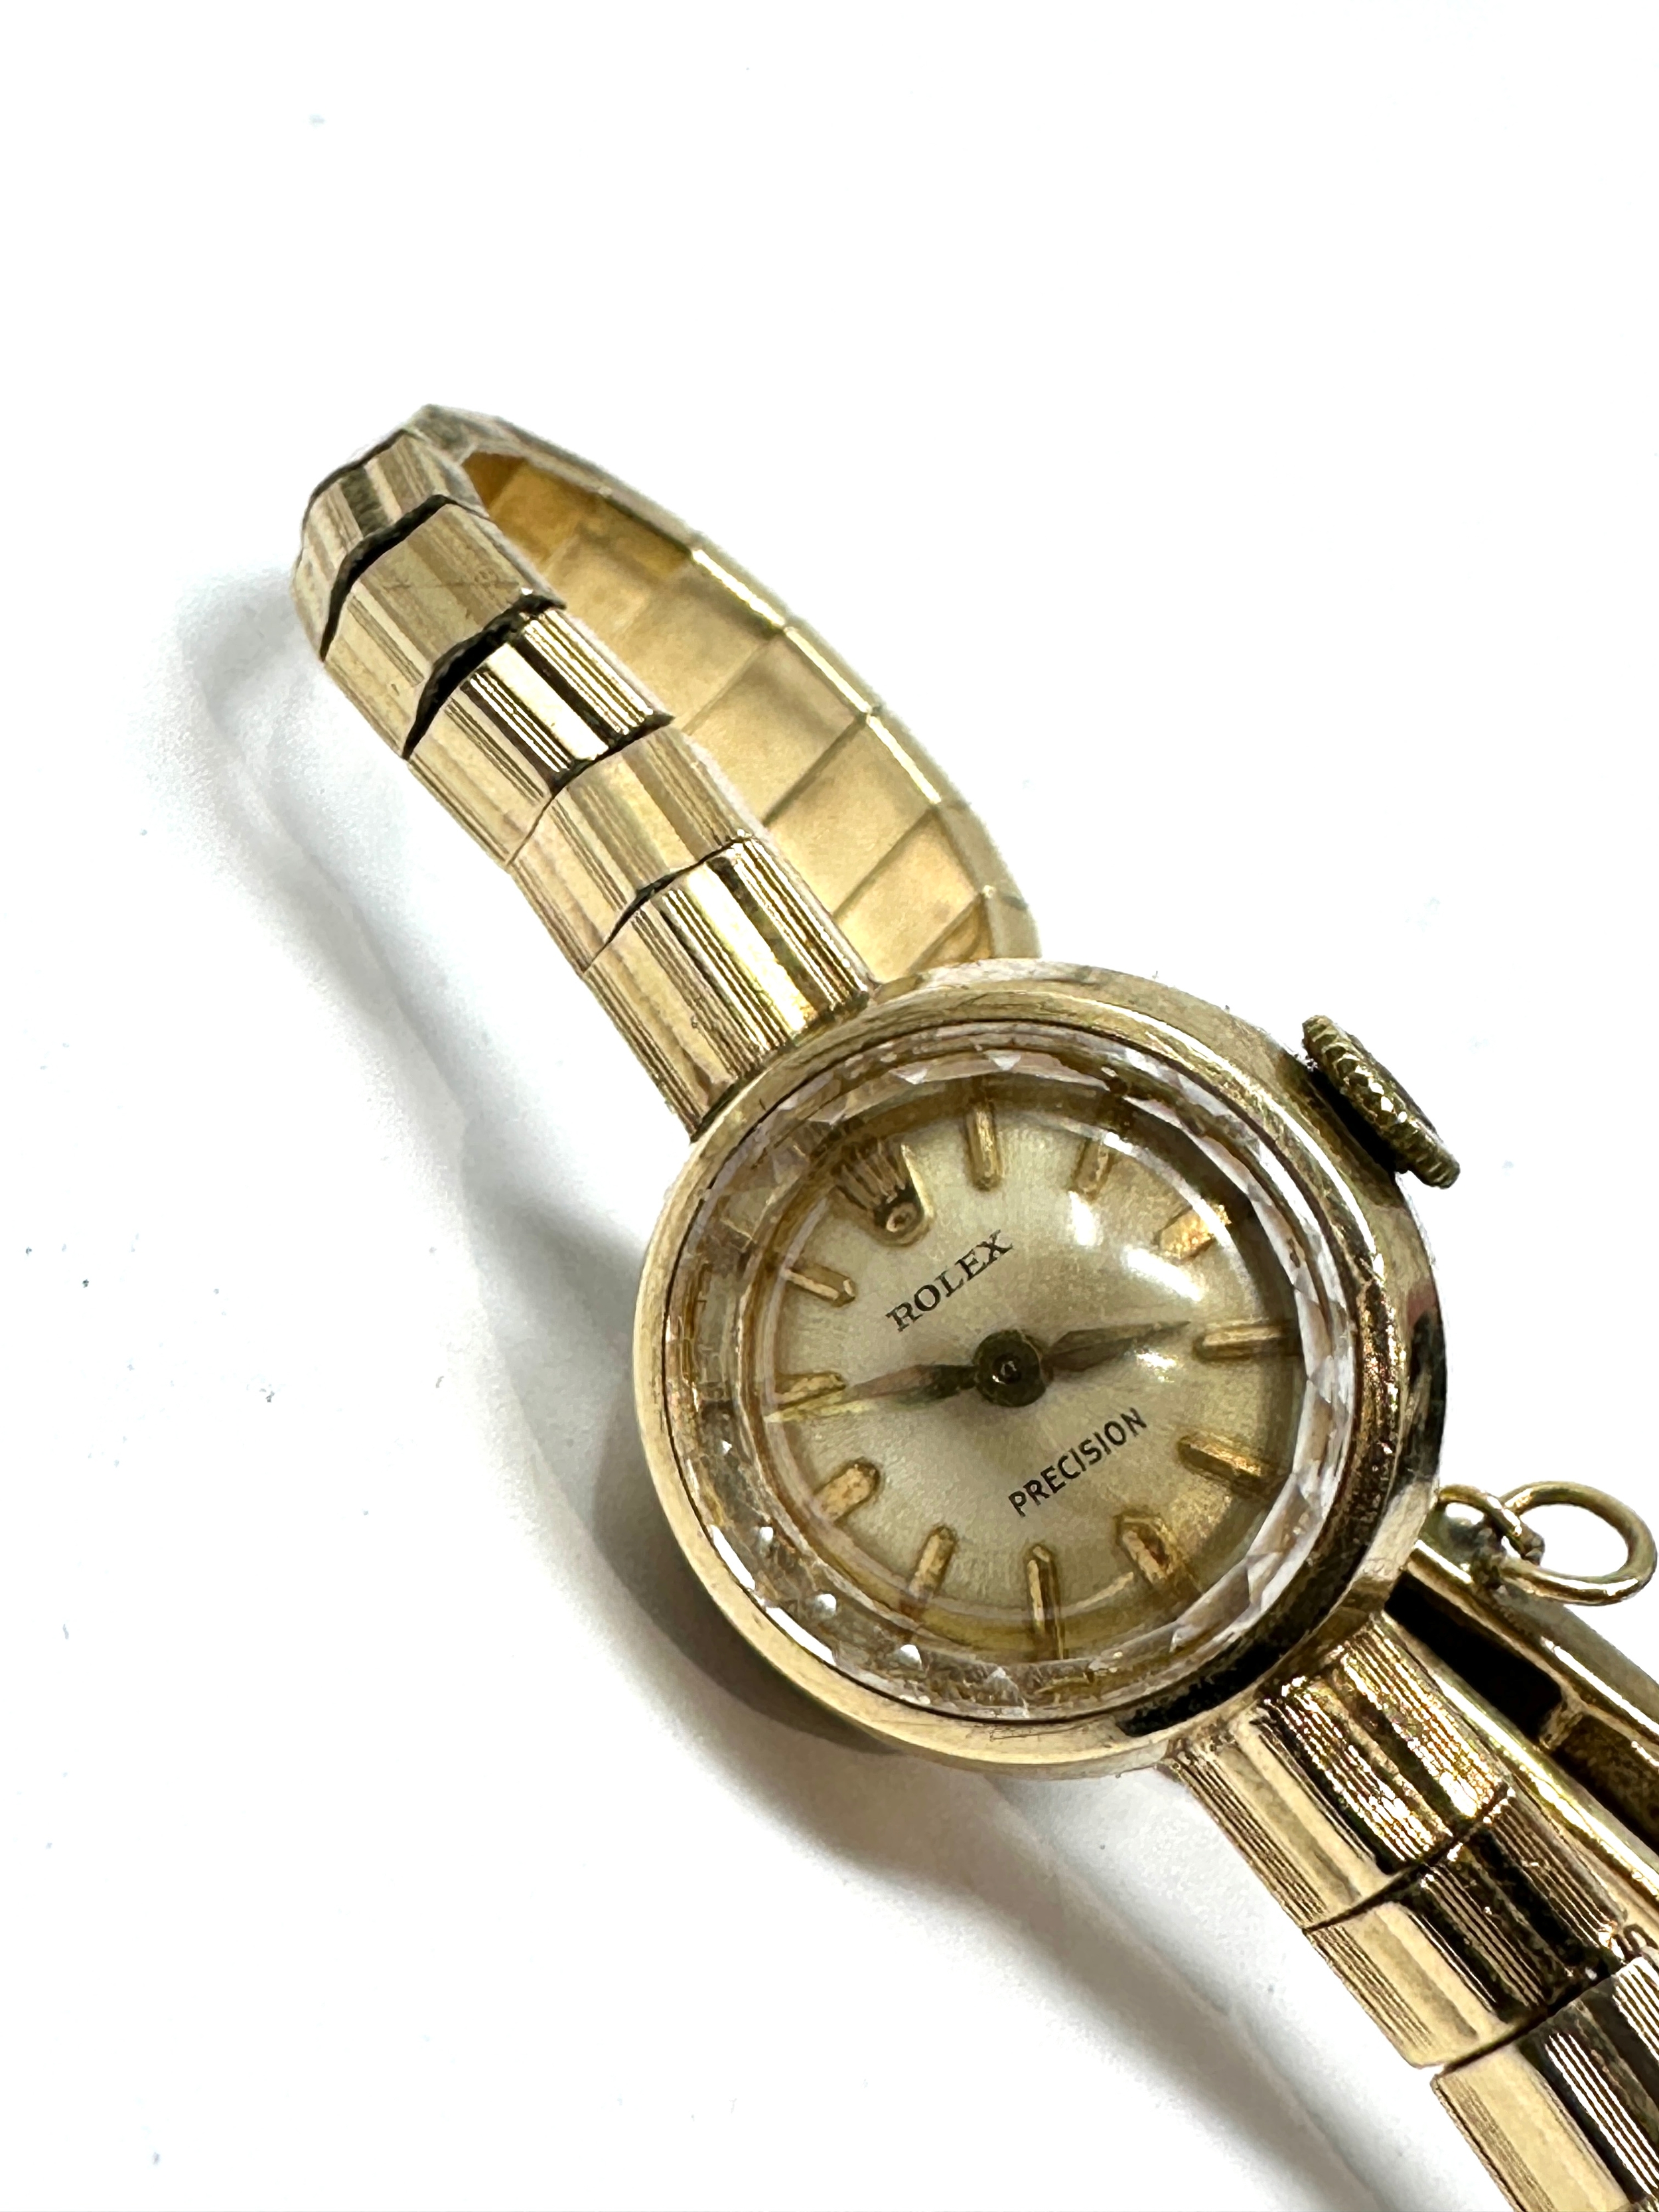 Vintage 9ct gold Rolex precision ladies wrist watch the watch is ticking weight 15.5g - Image 2 of 4